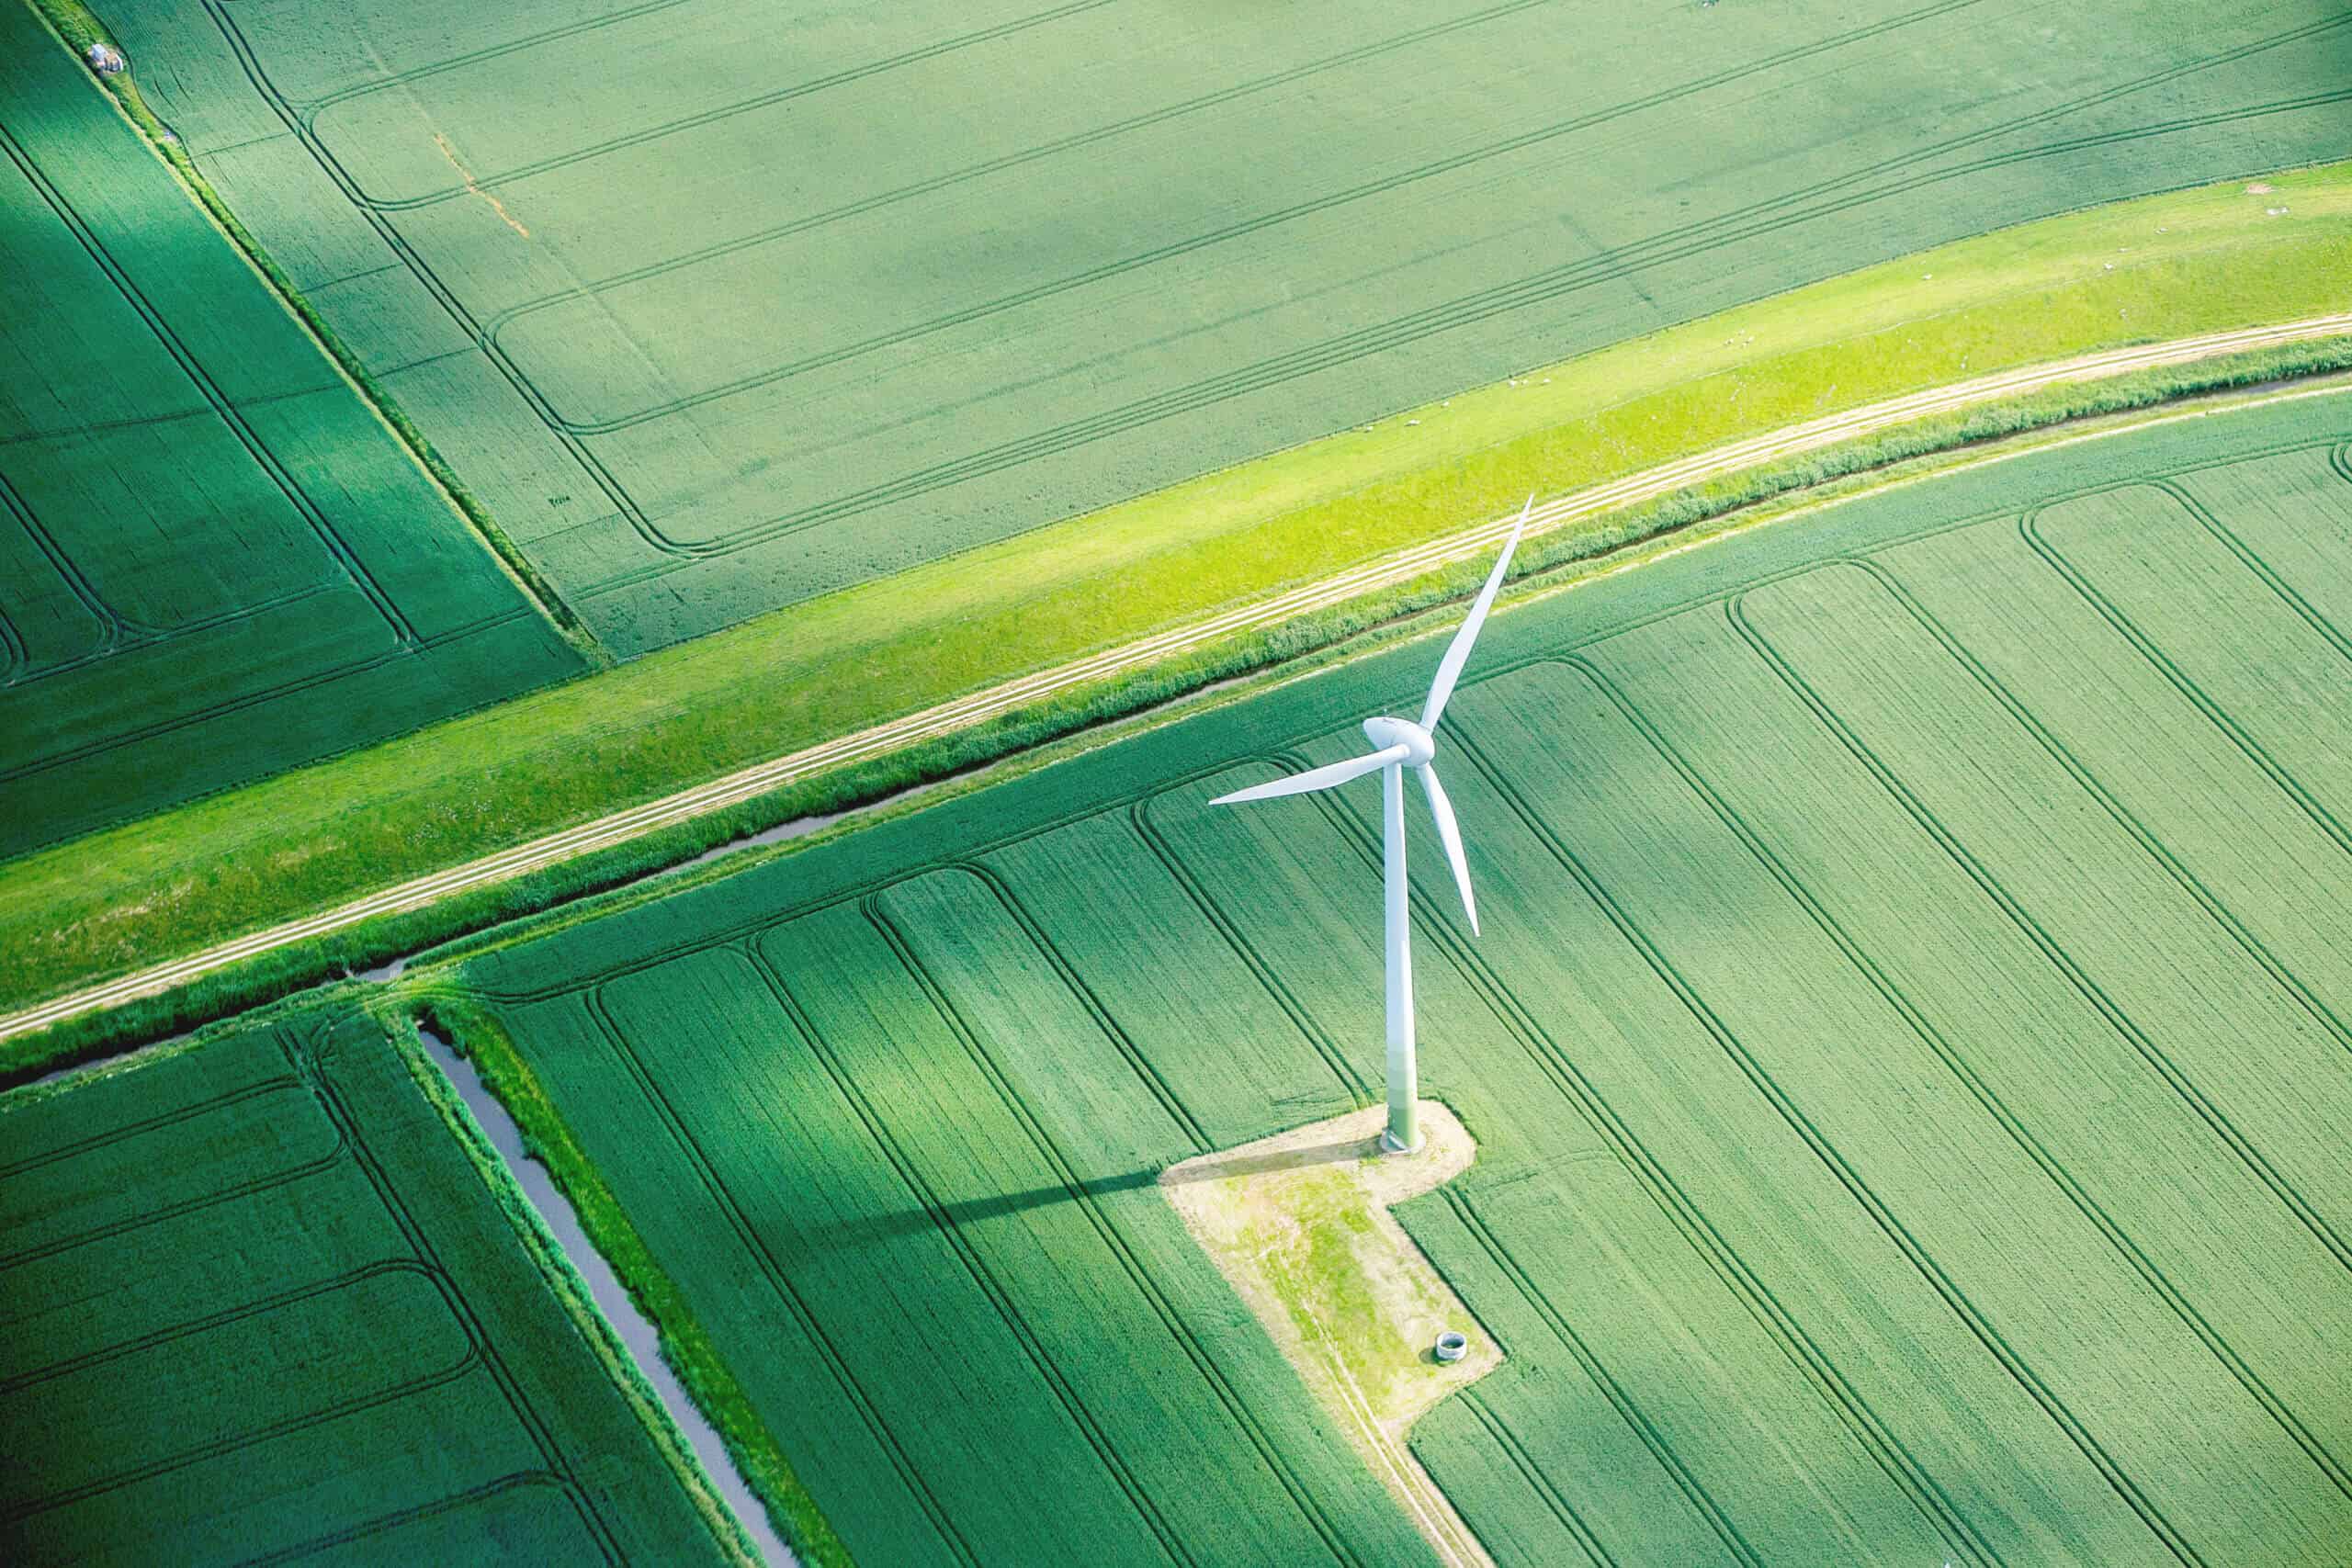 A wind turbine stands in a field of agricultural crops